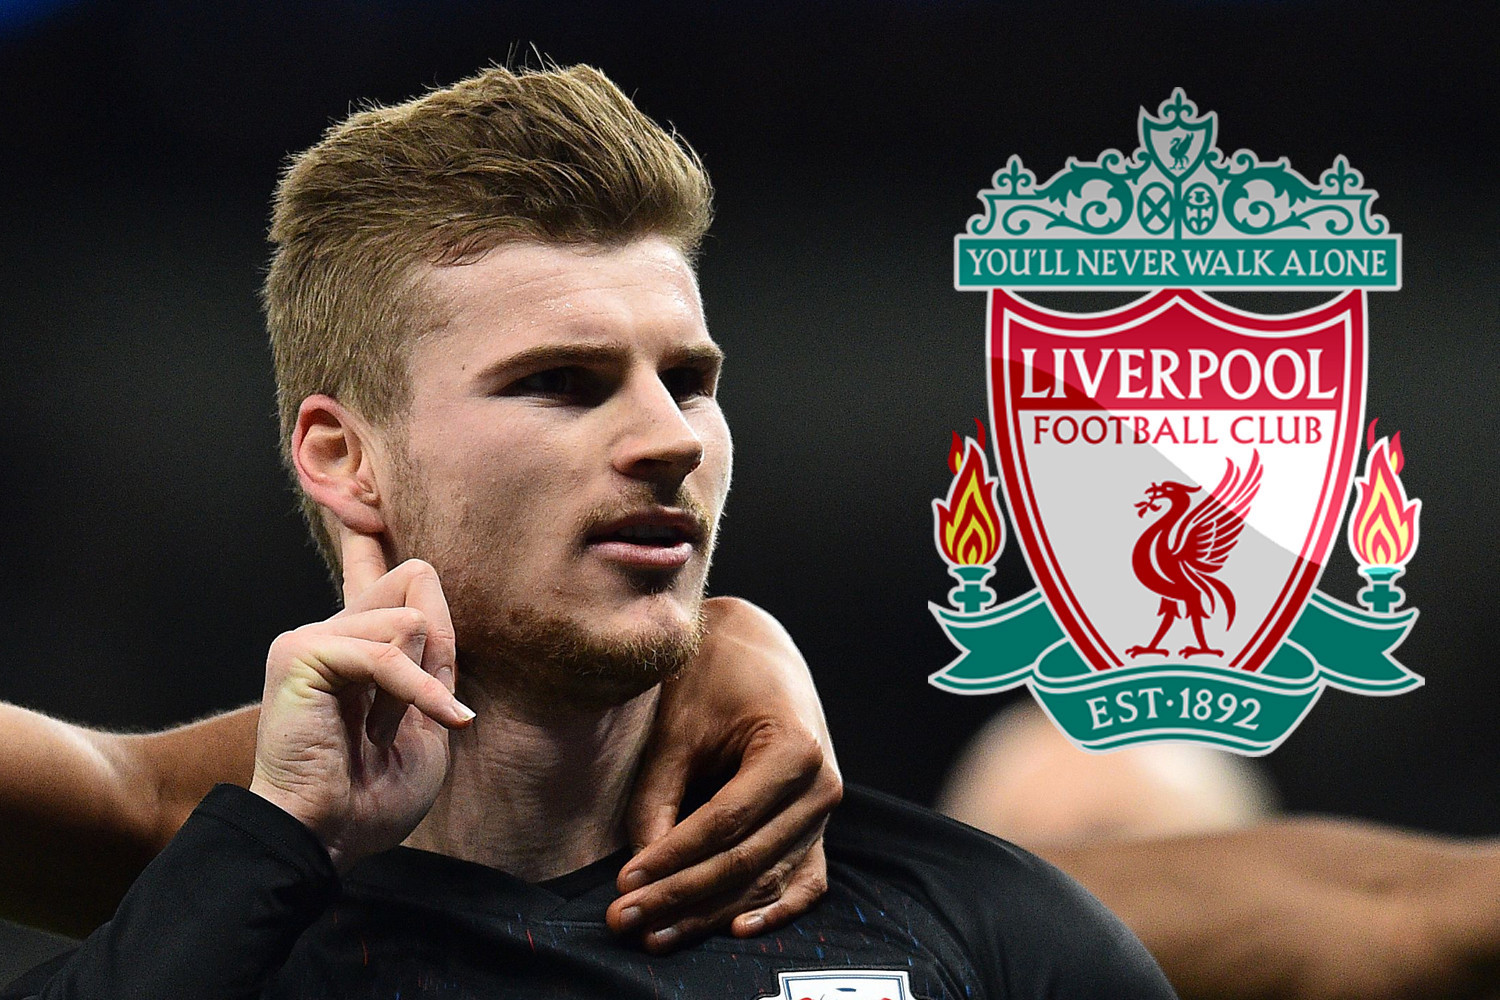 , RB Leipzig striker Timo Werner wants Liverpool transfer ahead of Chelsea and ready to go if £52m release clause is met